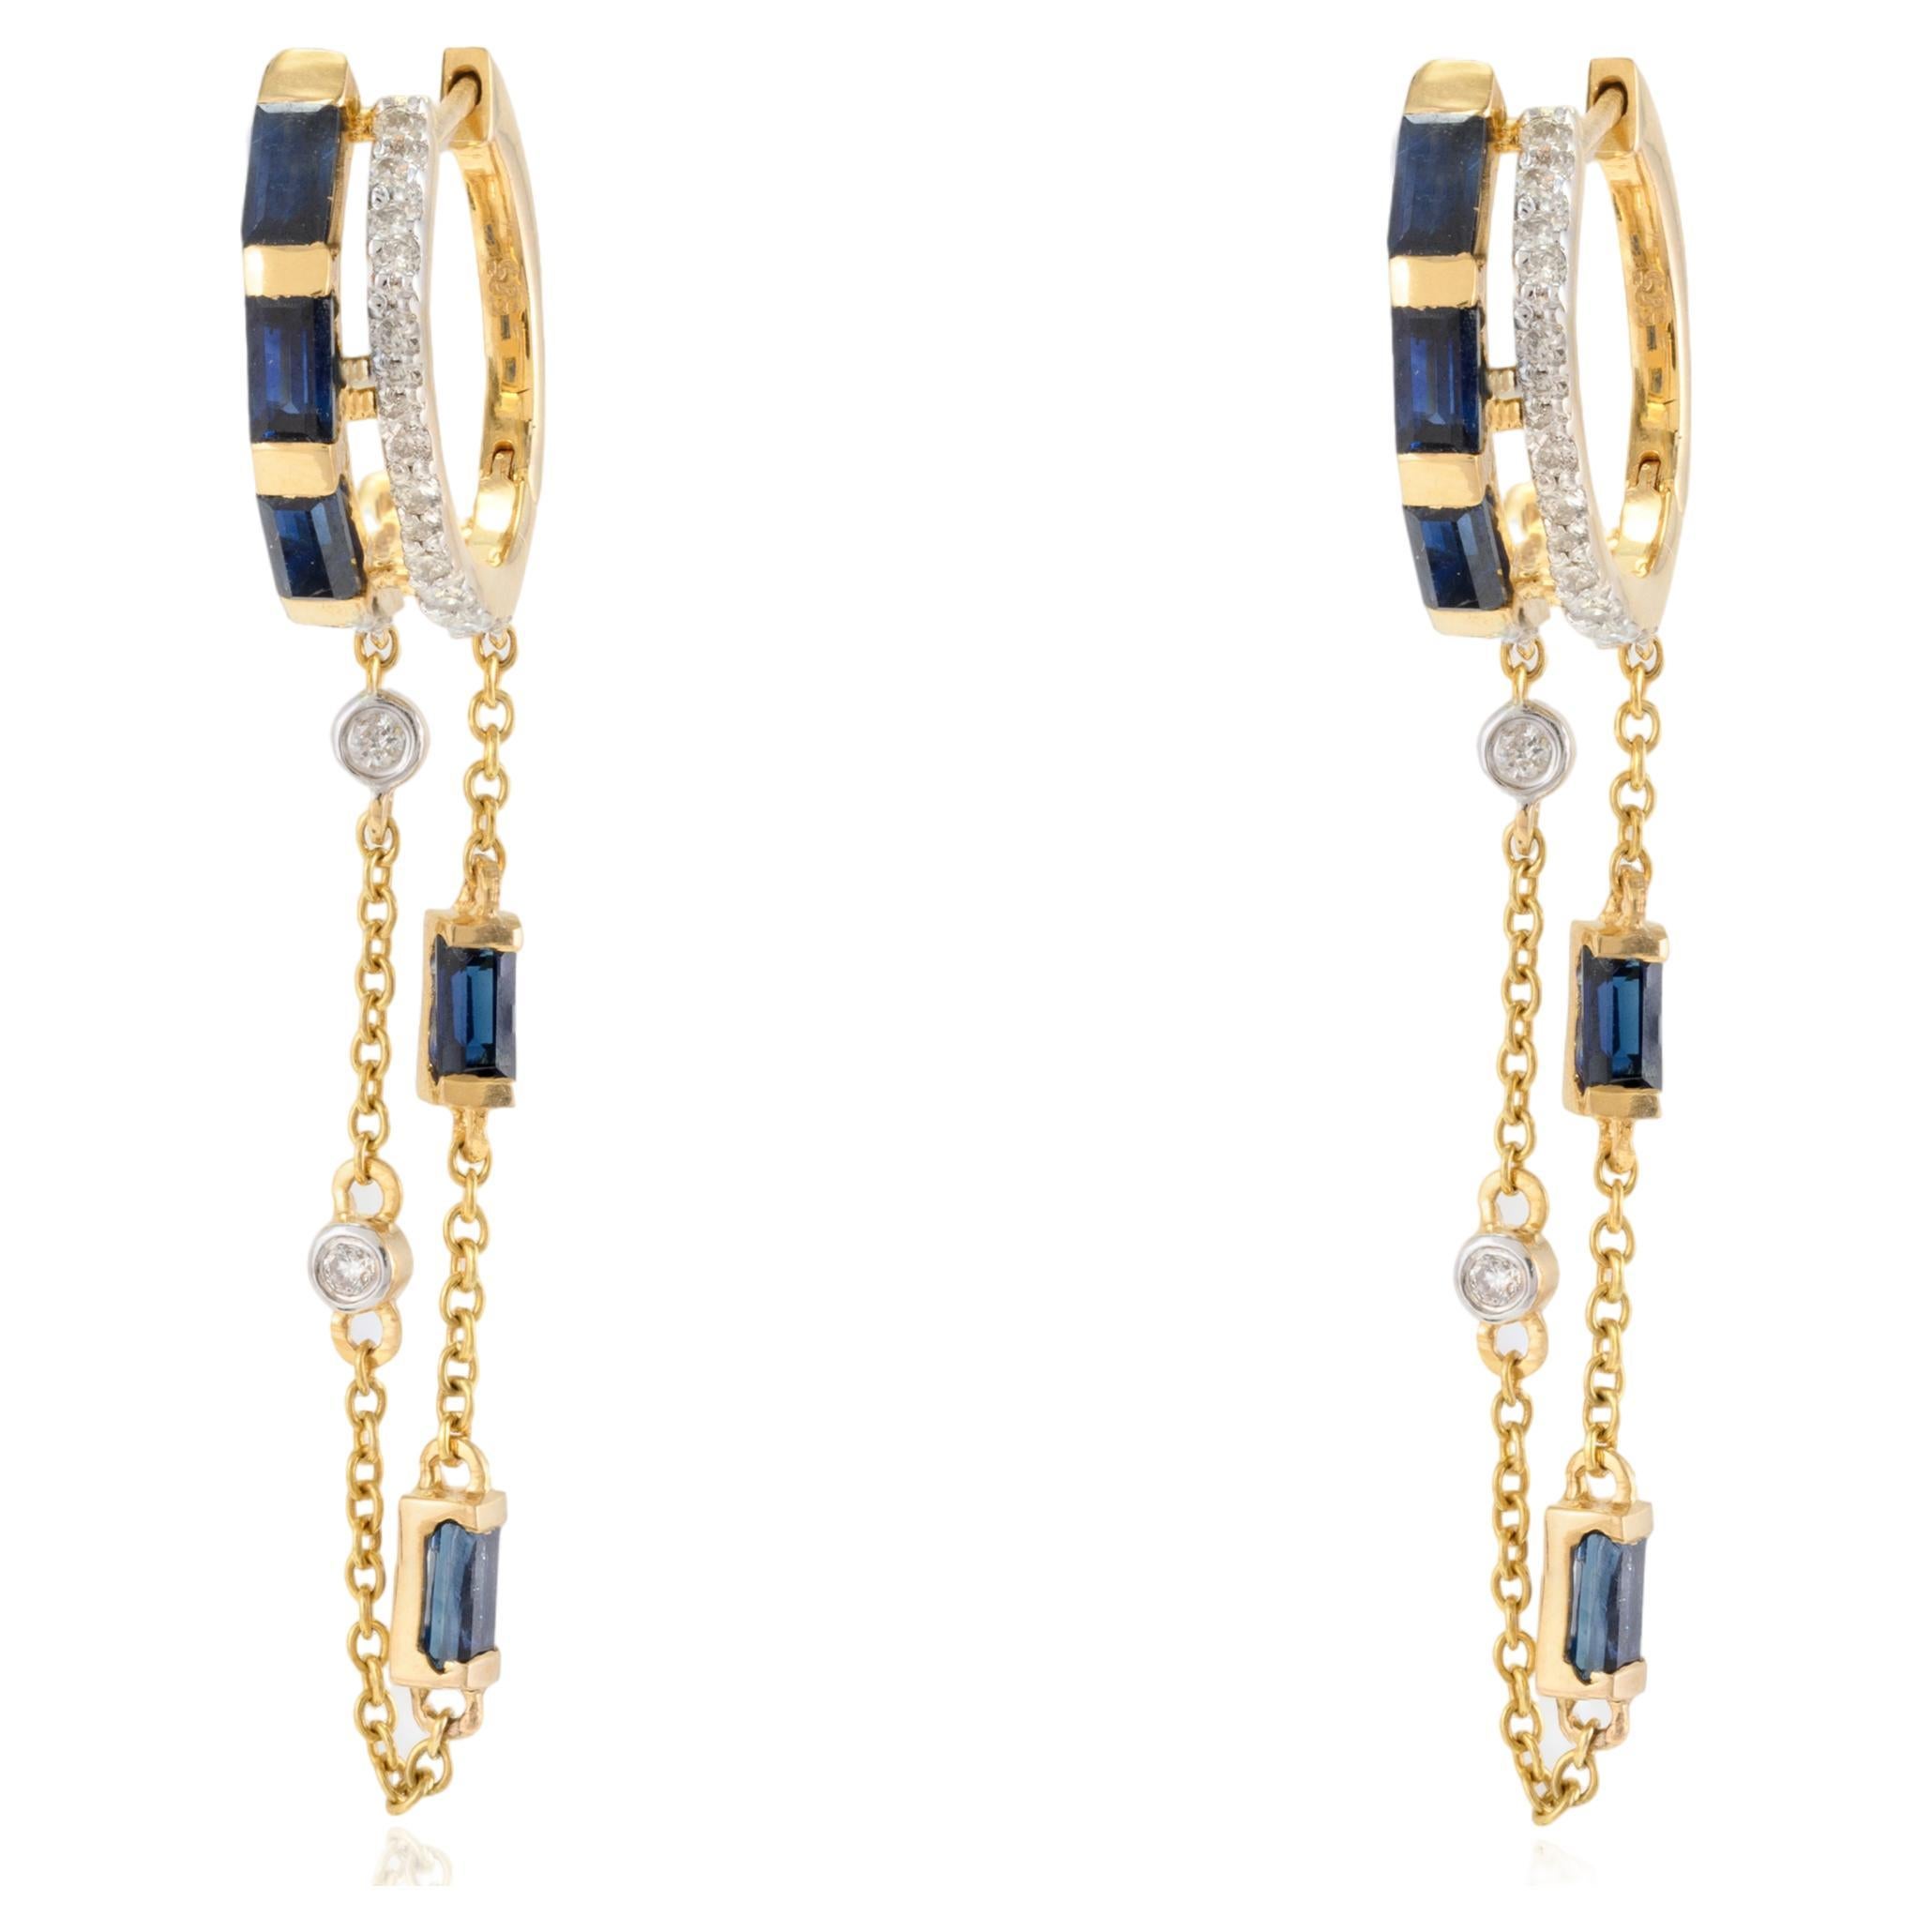 Unique Blue Sapphire and Diamond Dangling Chain Earrings in 14k Yellow Gold